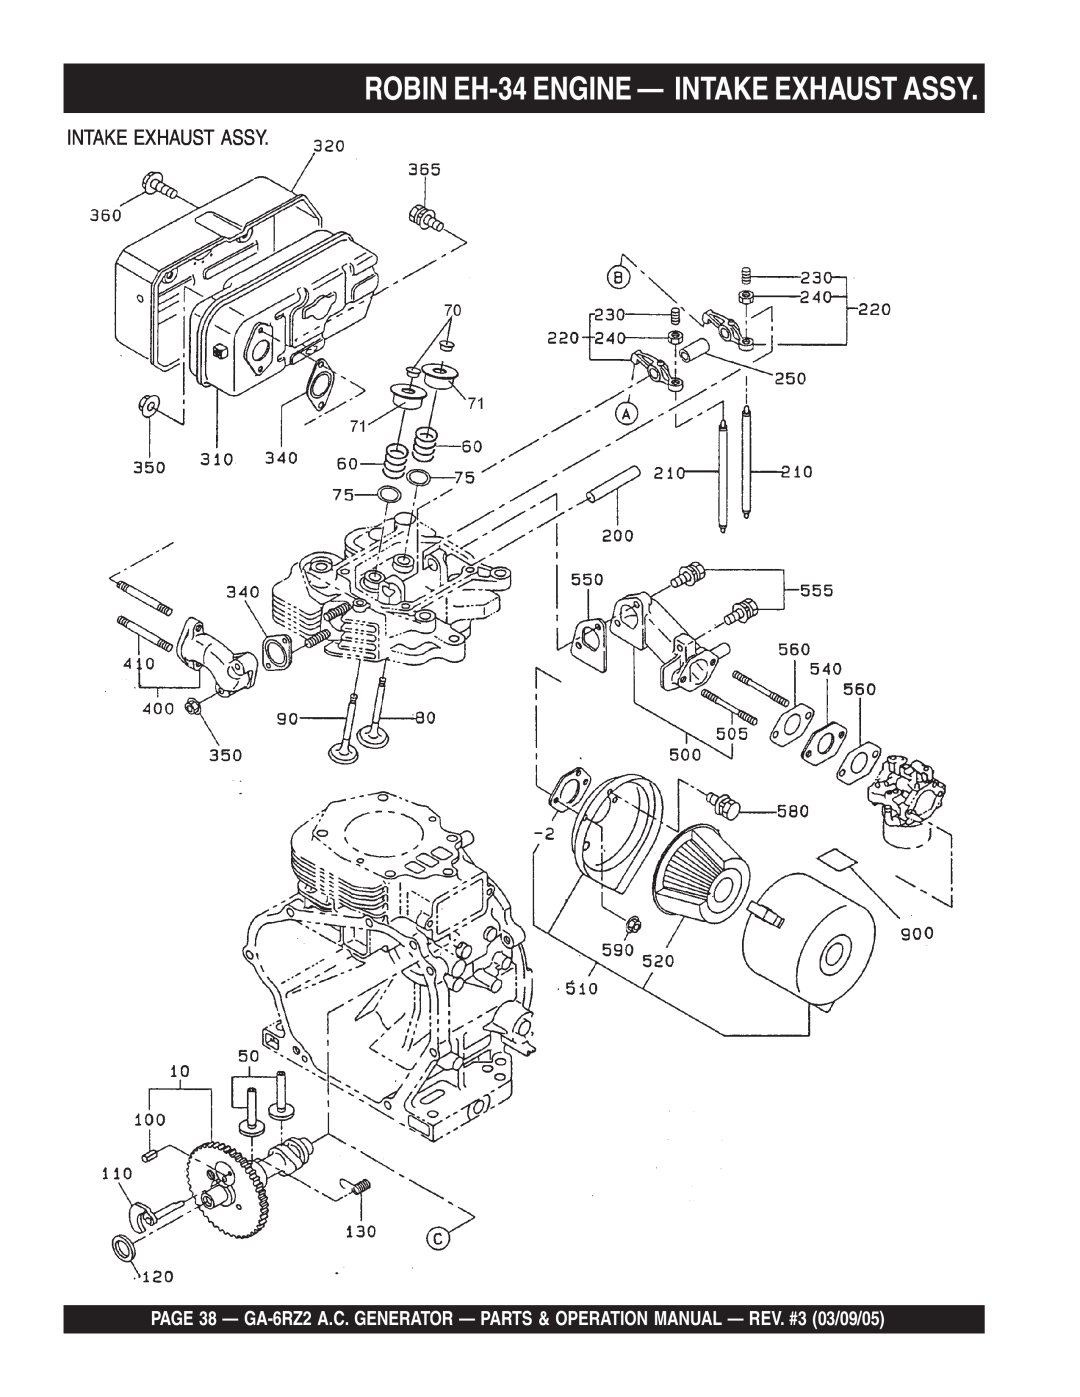 Multiquip GA-6RZ2 operation manual ROBIN EH-34ENGINE - INTAKE EXHAUST ASSY, Intake Exhaust Assy 